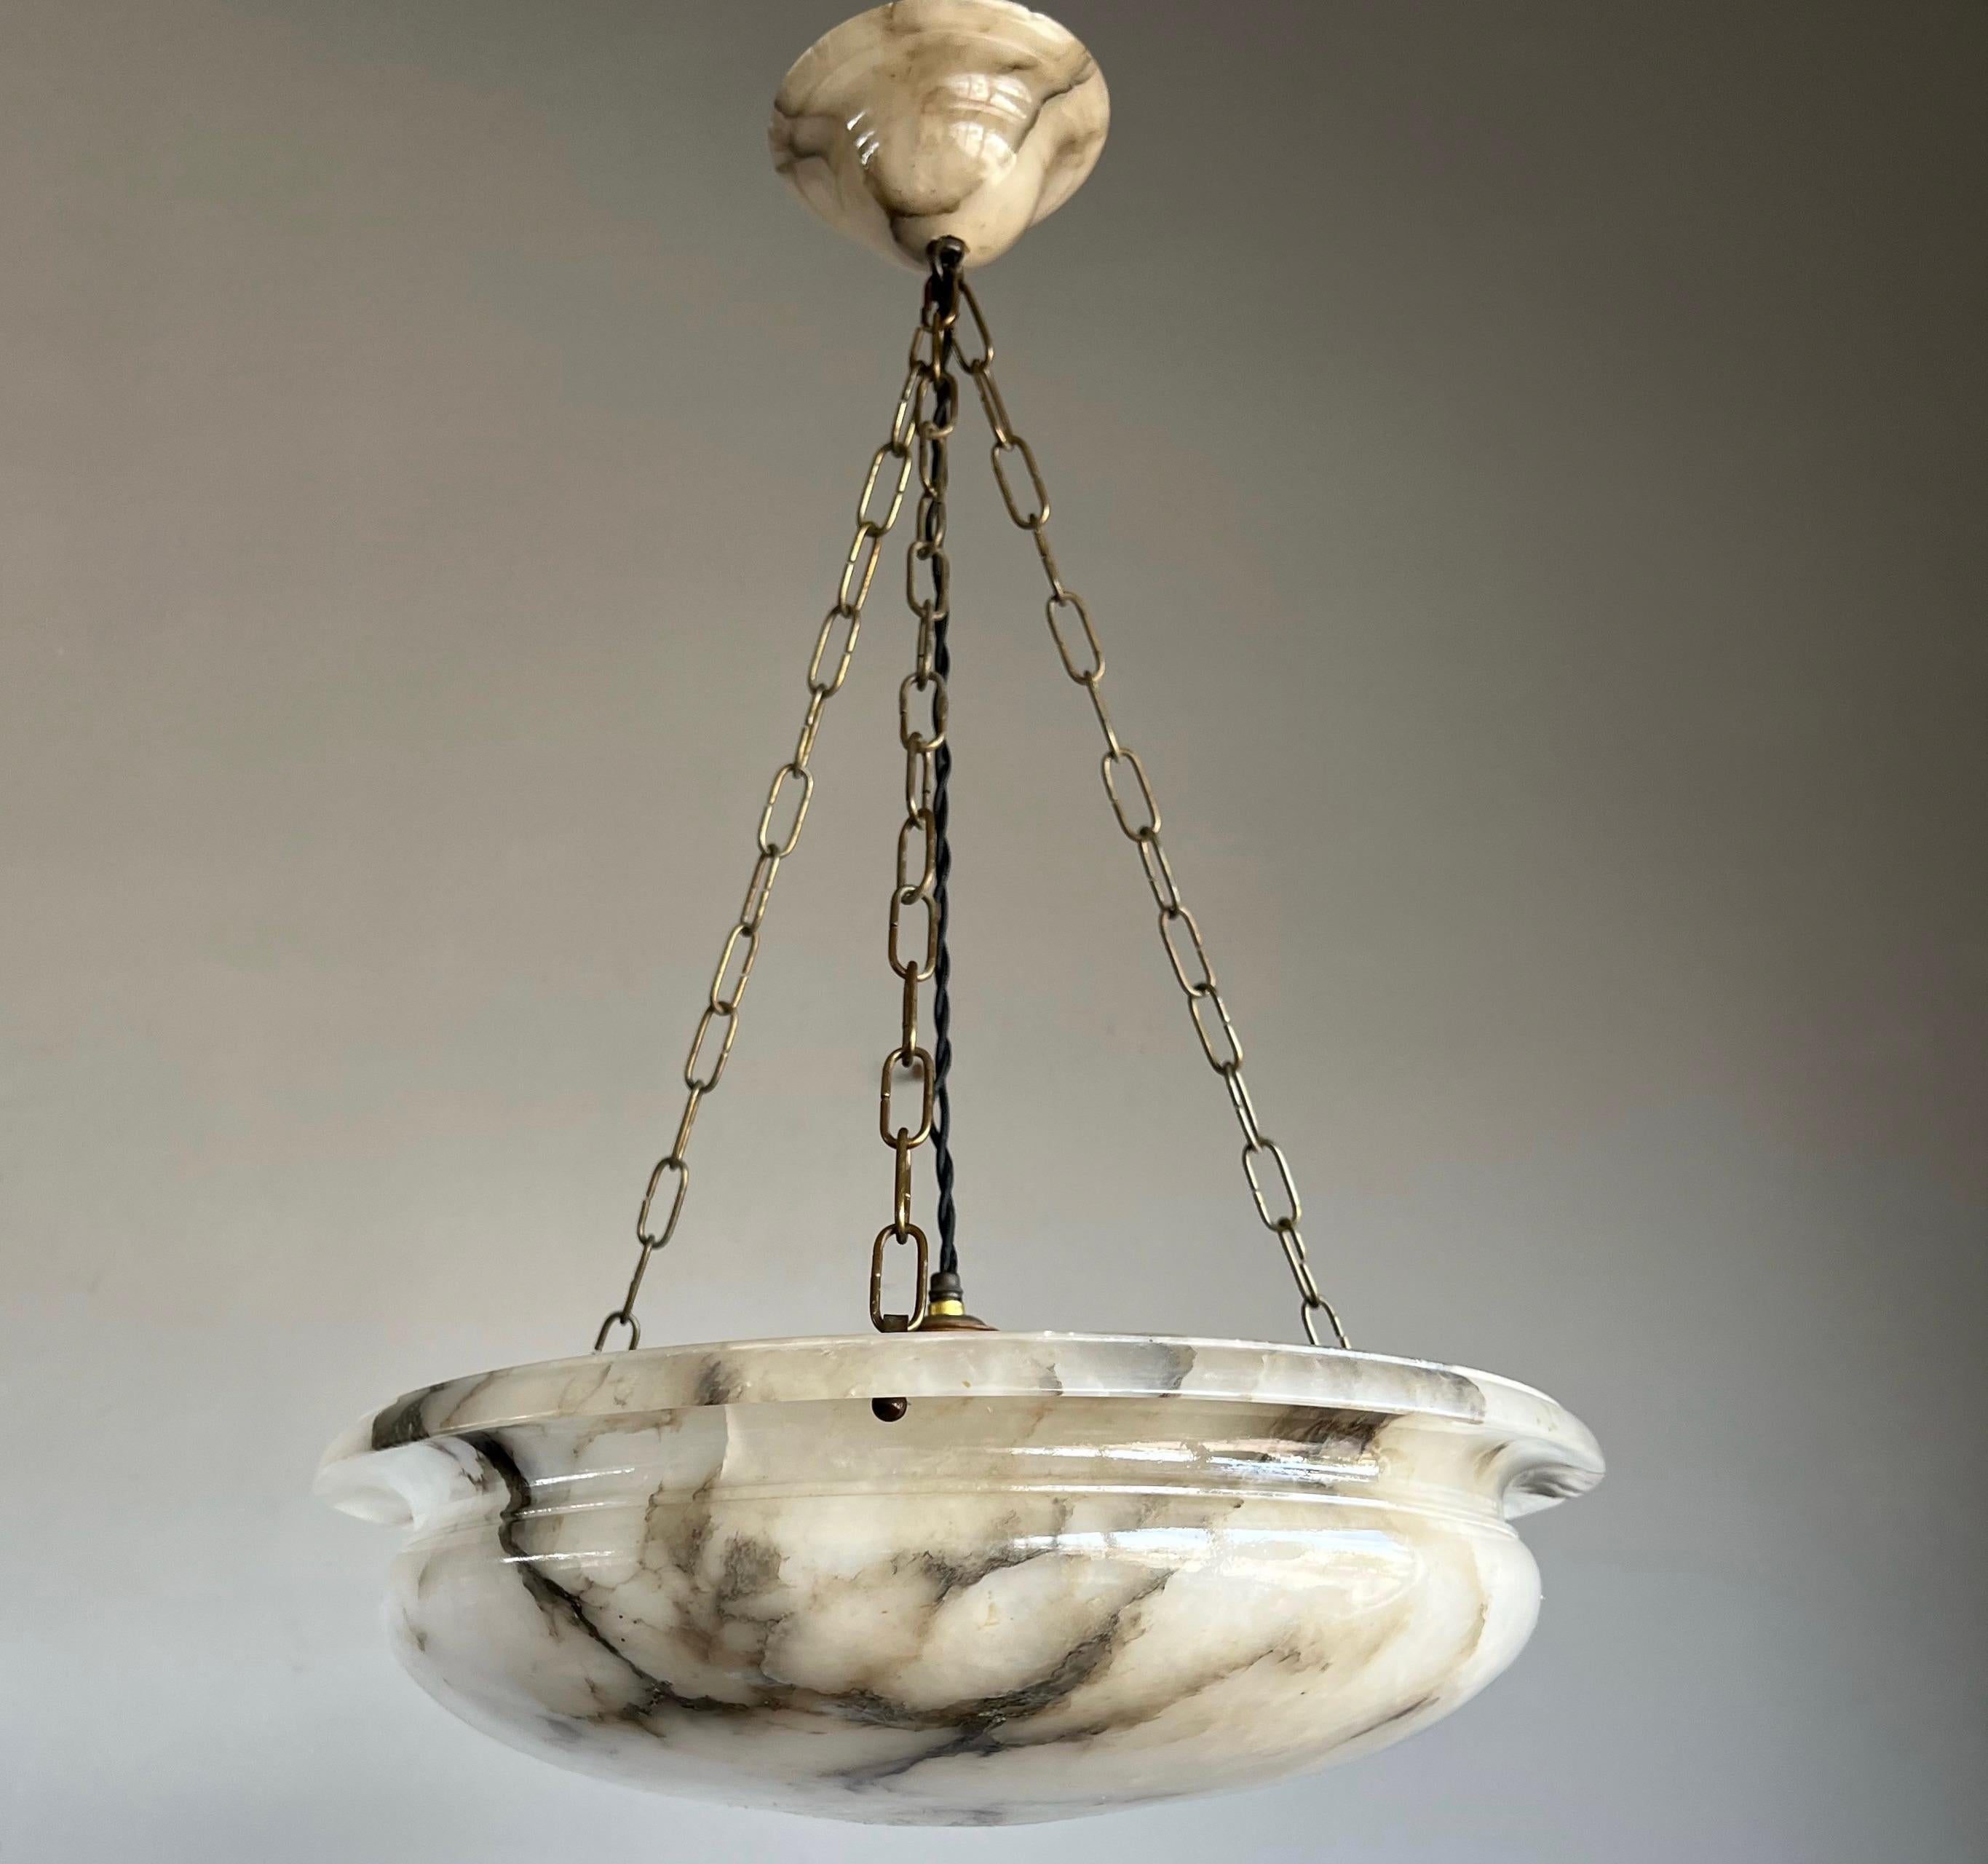 Stunning and the ideal size 17.7 inches in diameter alabaster light fixture.

Thanks to its large size and timeless design this alabaster chandelier from the Arts and Crafts era is one of the most beautiful models we have seen and sold to date. We